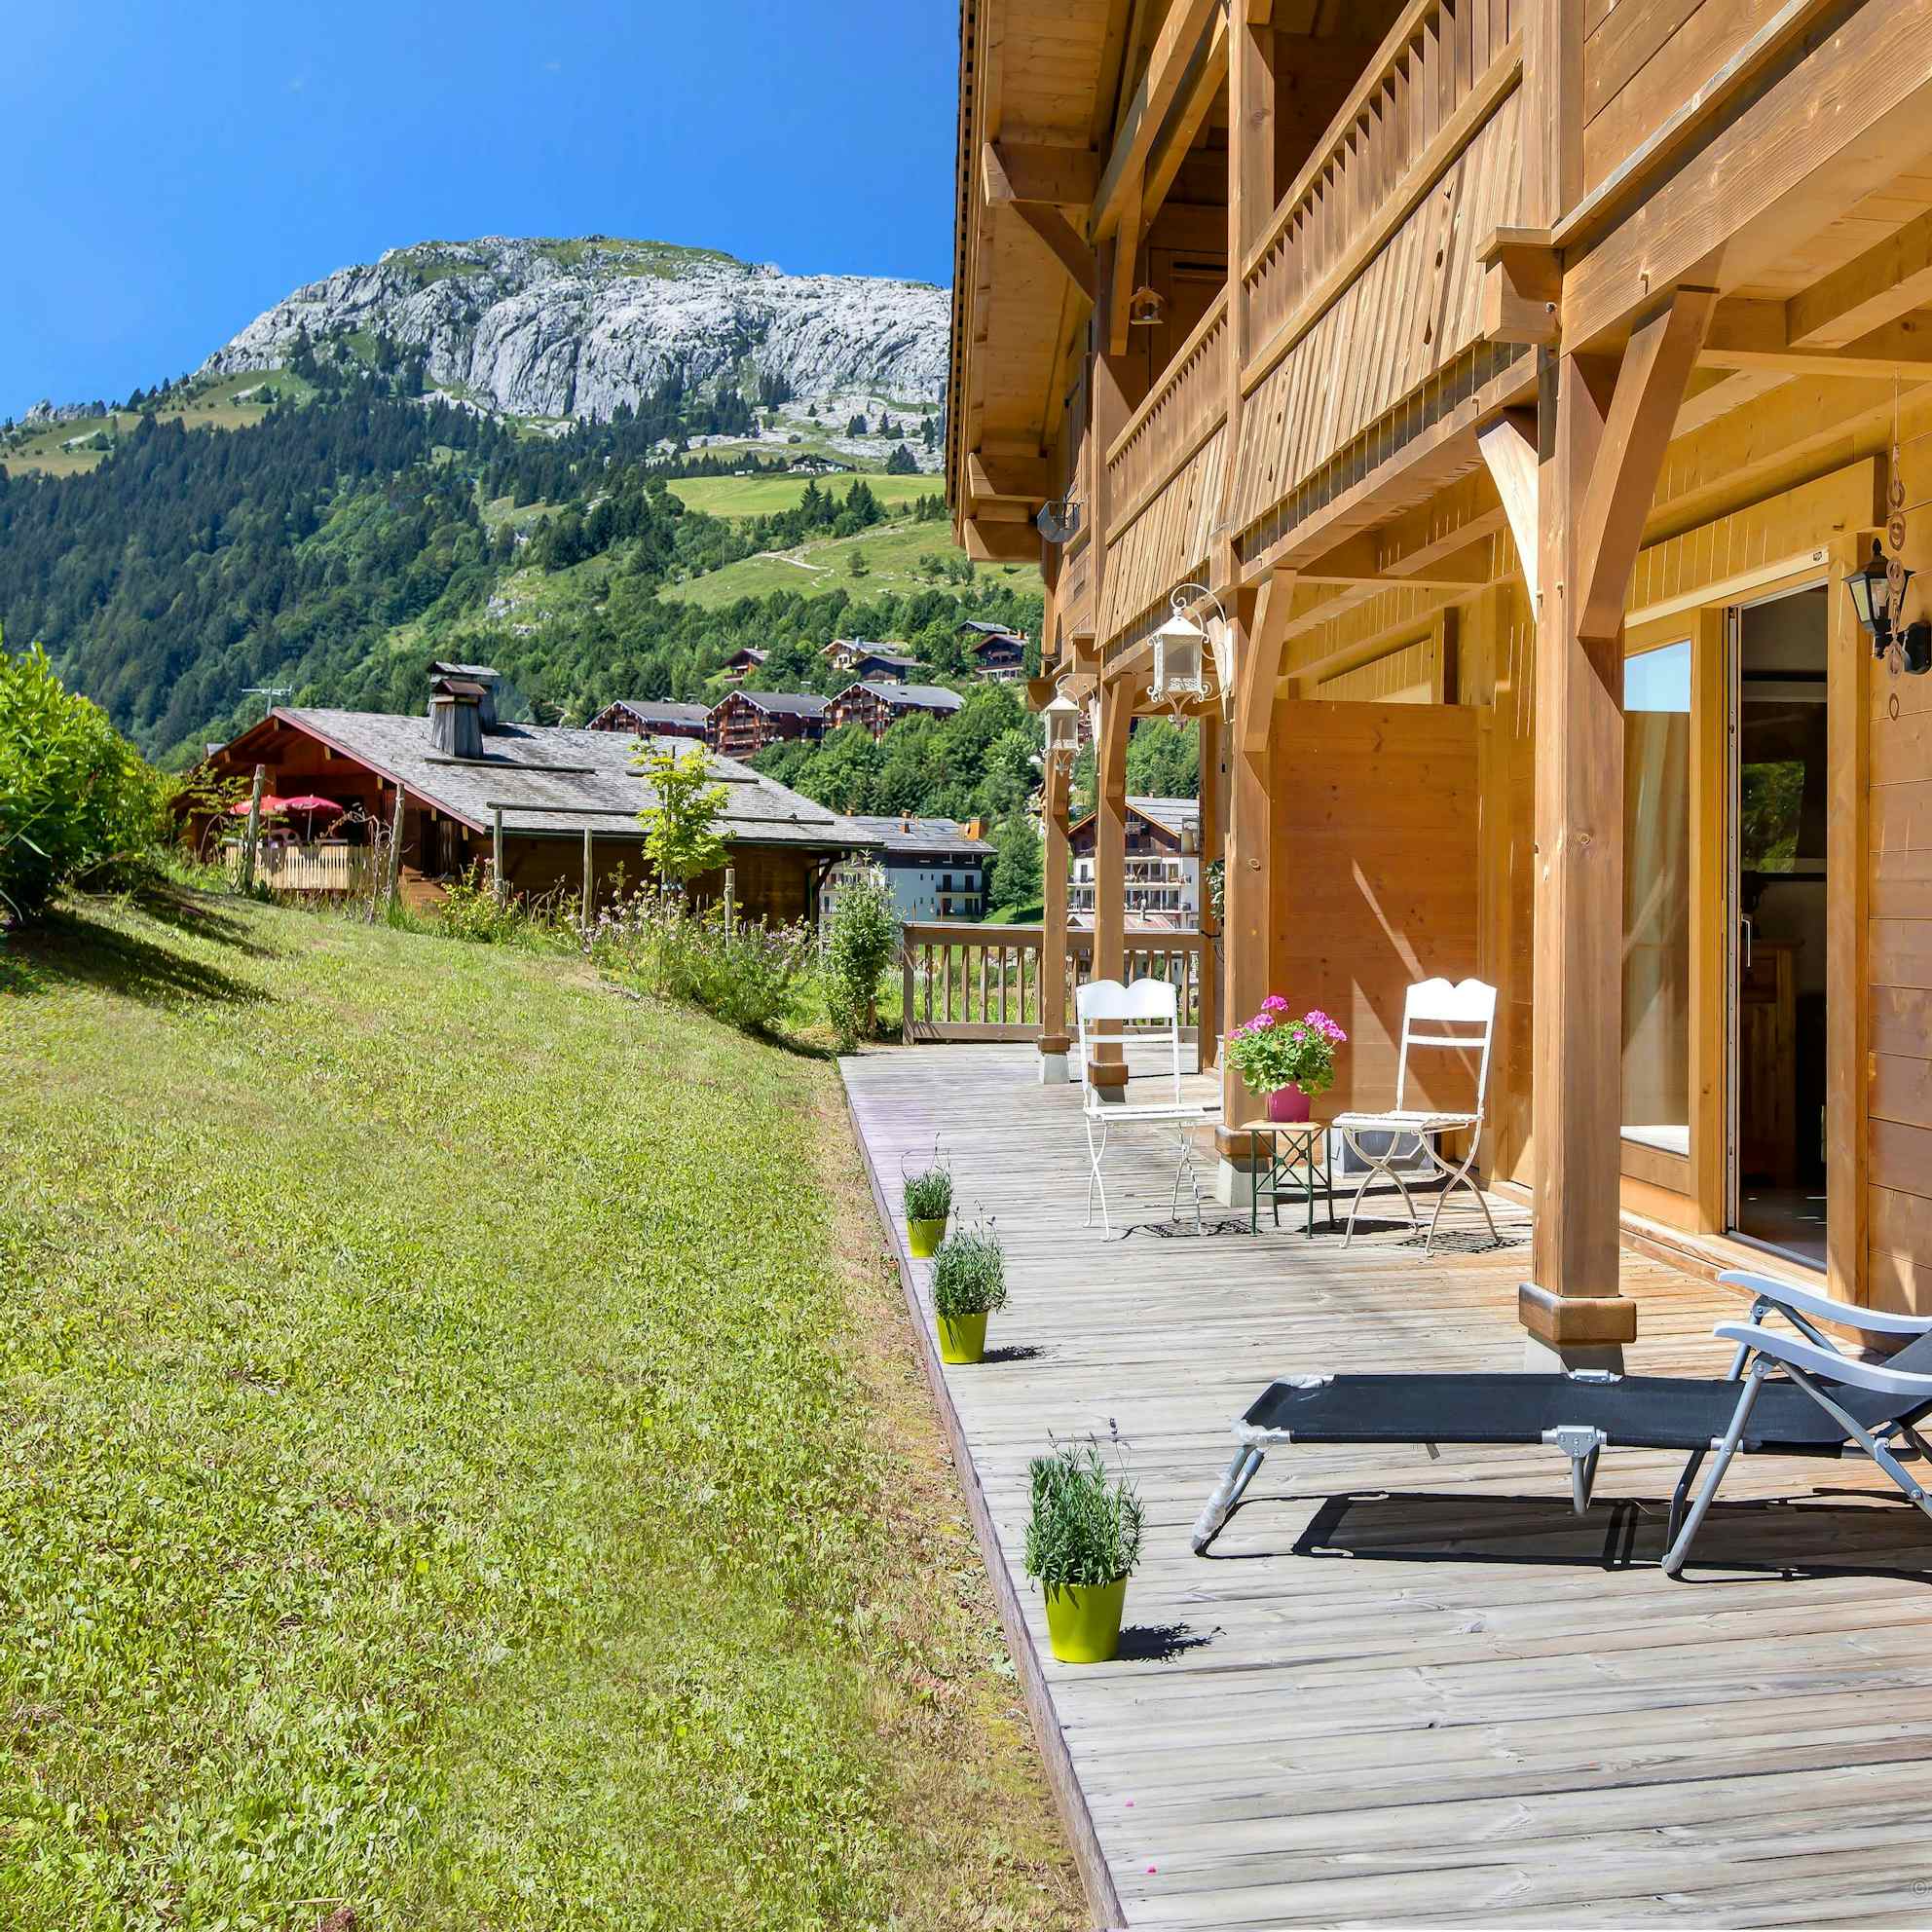 Chalet L'Ours Blanc